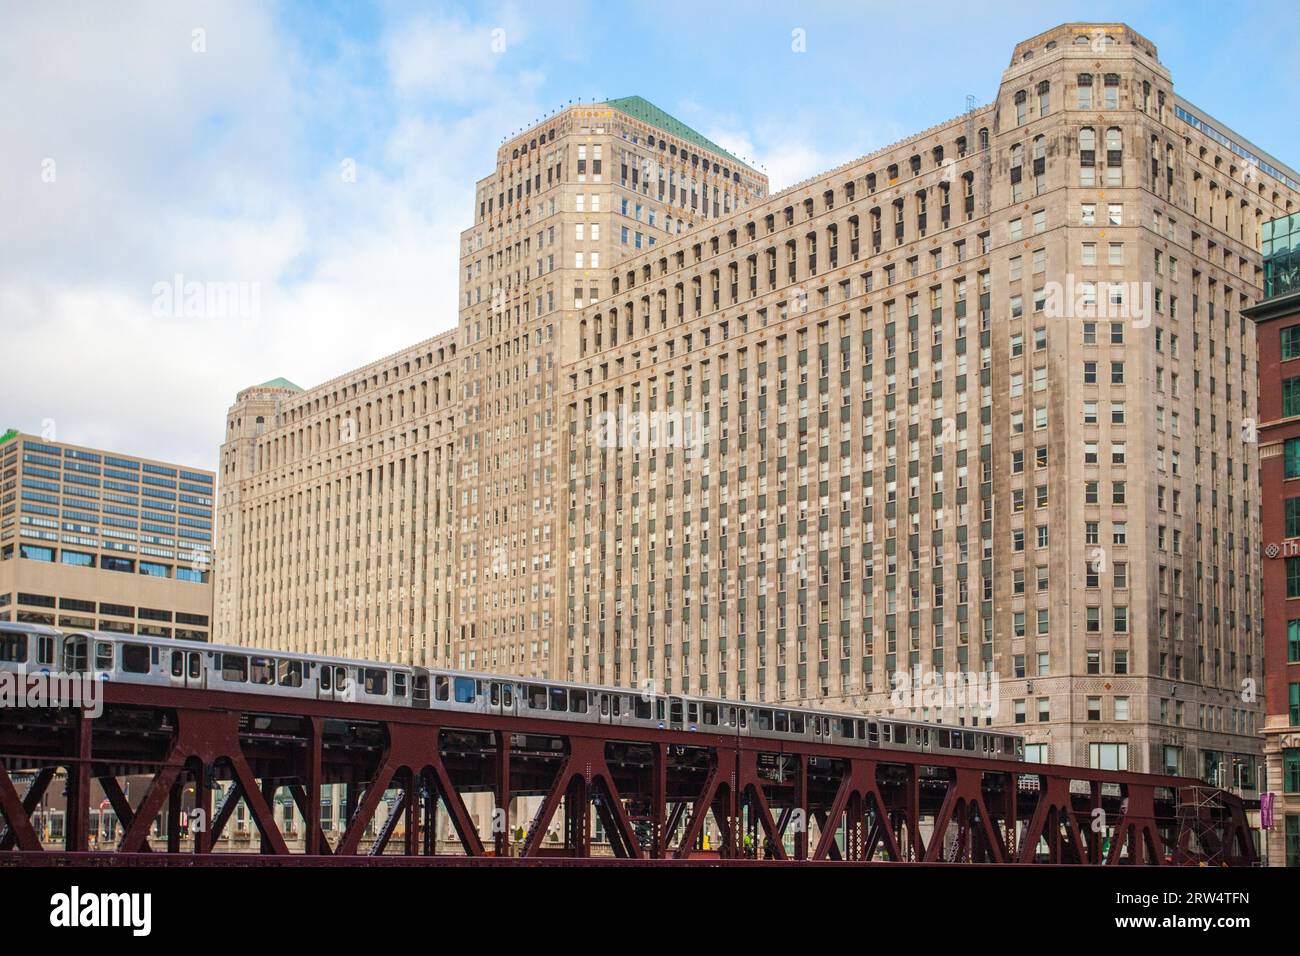 The Merchandise Mart and a train on a clear winter's morning in Chicago, USA Stock Photo